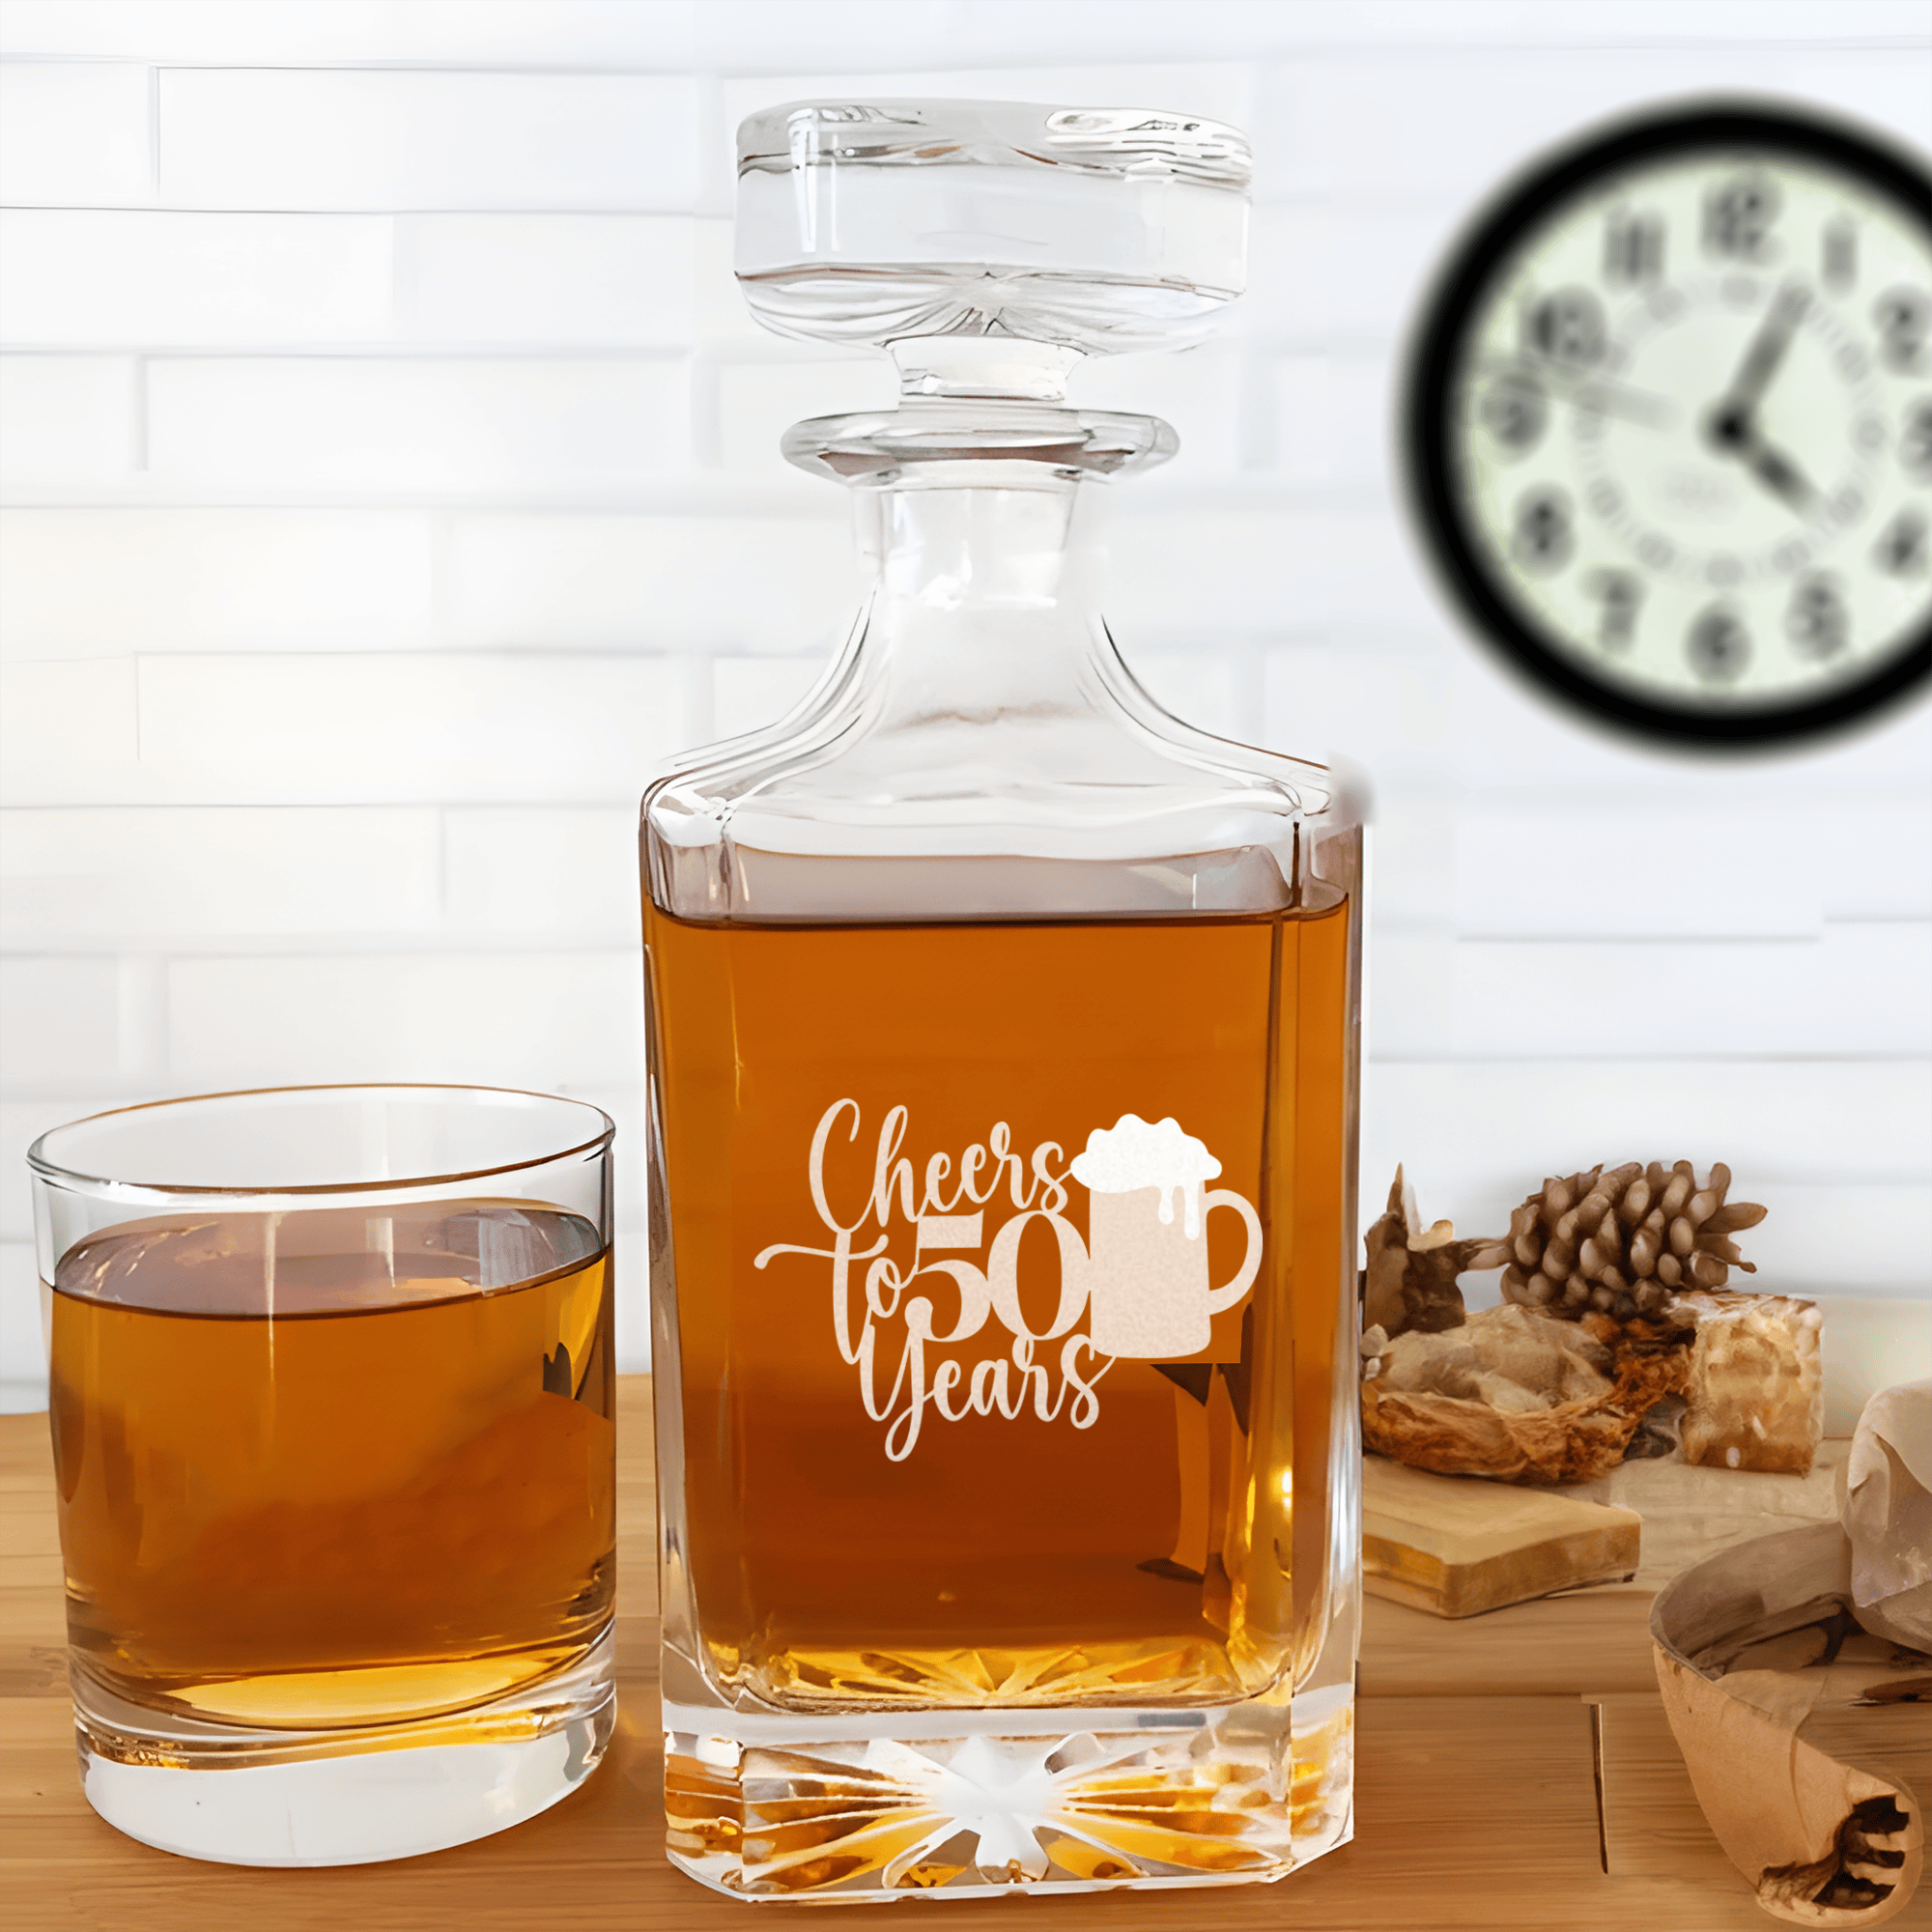 Birthday Whiskey Decanter With Cheers To 50 Years Beers Design